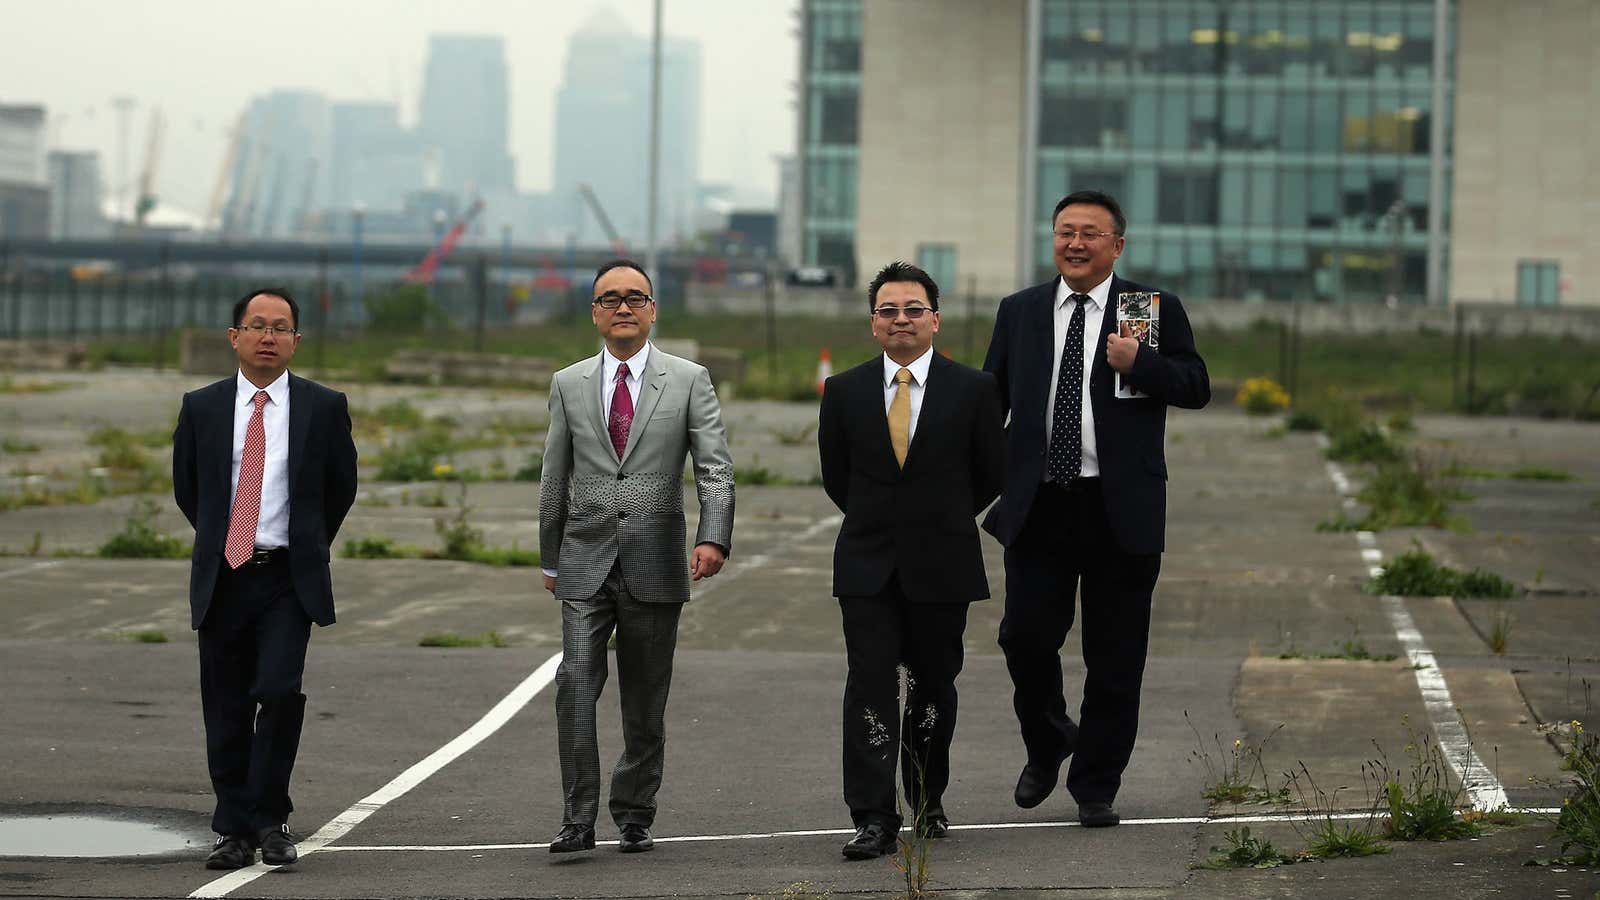 Xu Weiping (second from left) surveys his latest development project, the Royal Albert Dock in east London.